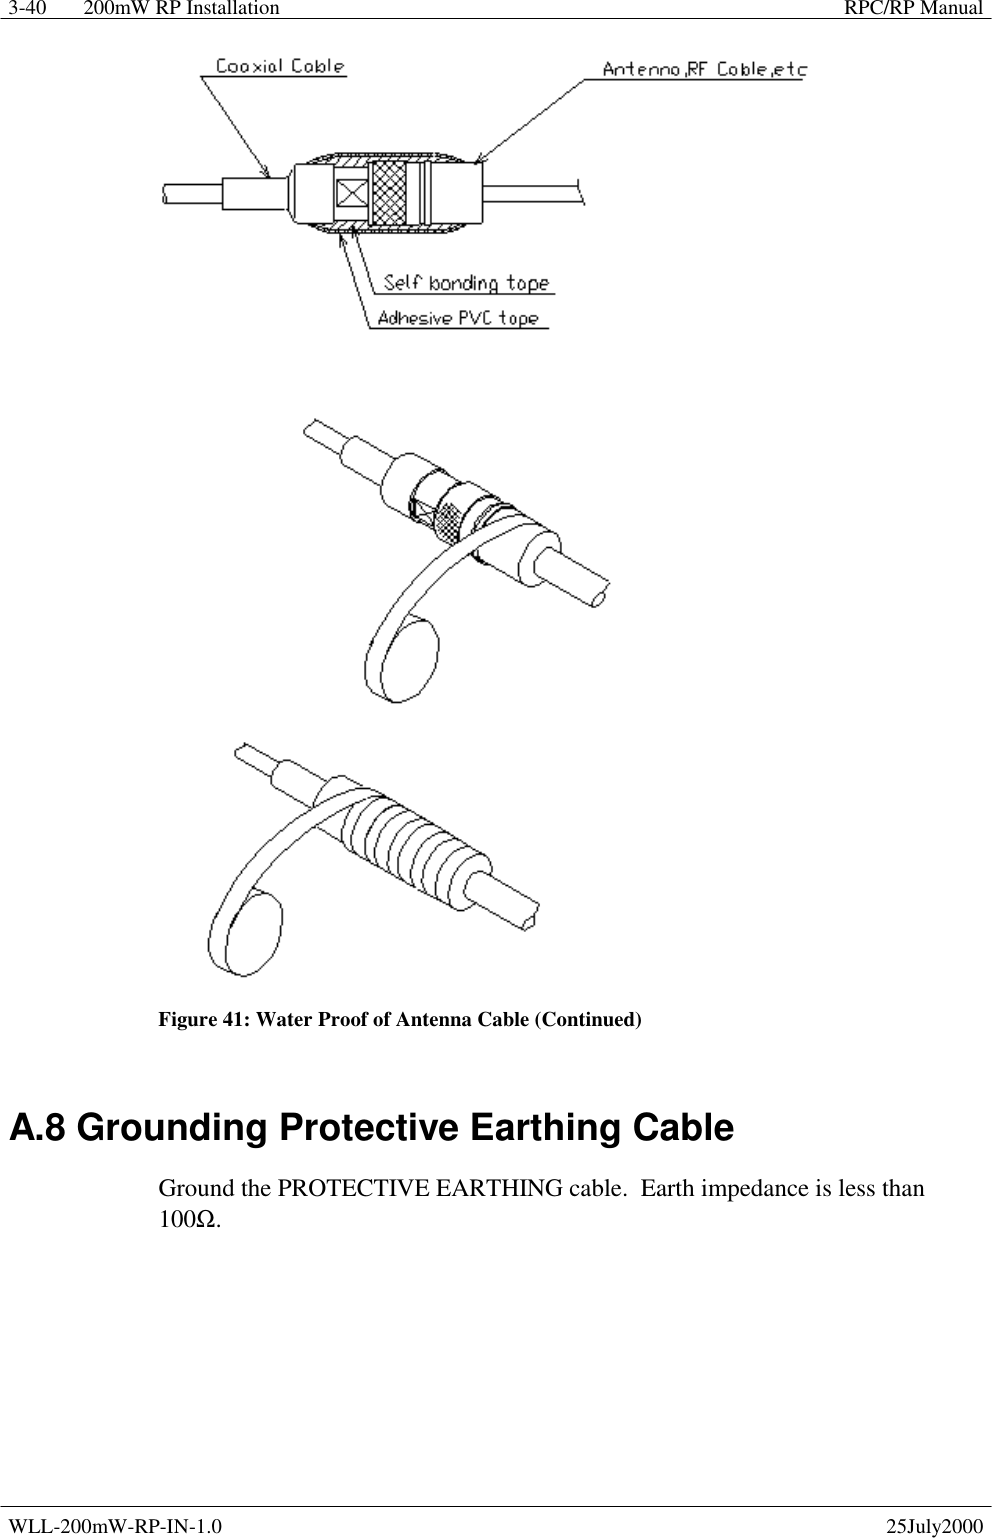 200mW RP Installation    RPC/RP Manual WLL-200mW-RP-IN-1.0   25July2000 3-40  Figure 41: Water Proof of Antenna Cable (Continued) A.8 Grounding Protective Earthing Cable Ground the PROTECTIVE EARTHING cable.  Earth impedance is less than 100Ω. 